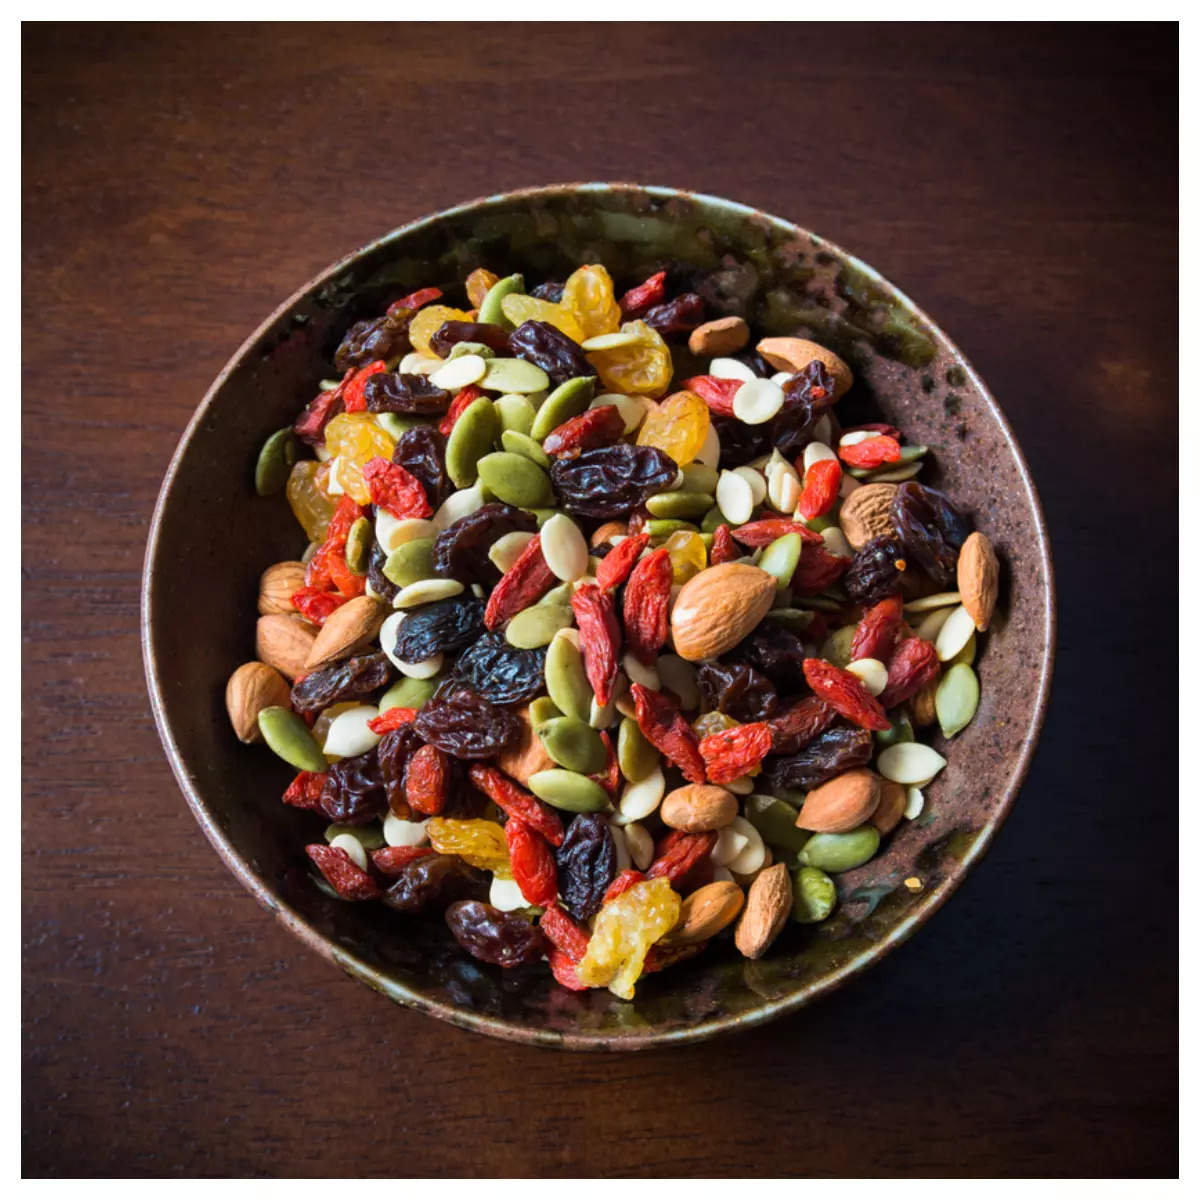 Indian-style Trail Mix Recipe: How to Make Indian-style Trail Mix at Home -  Times Food